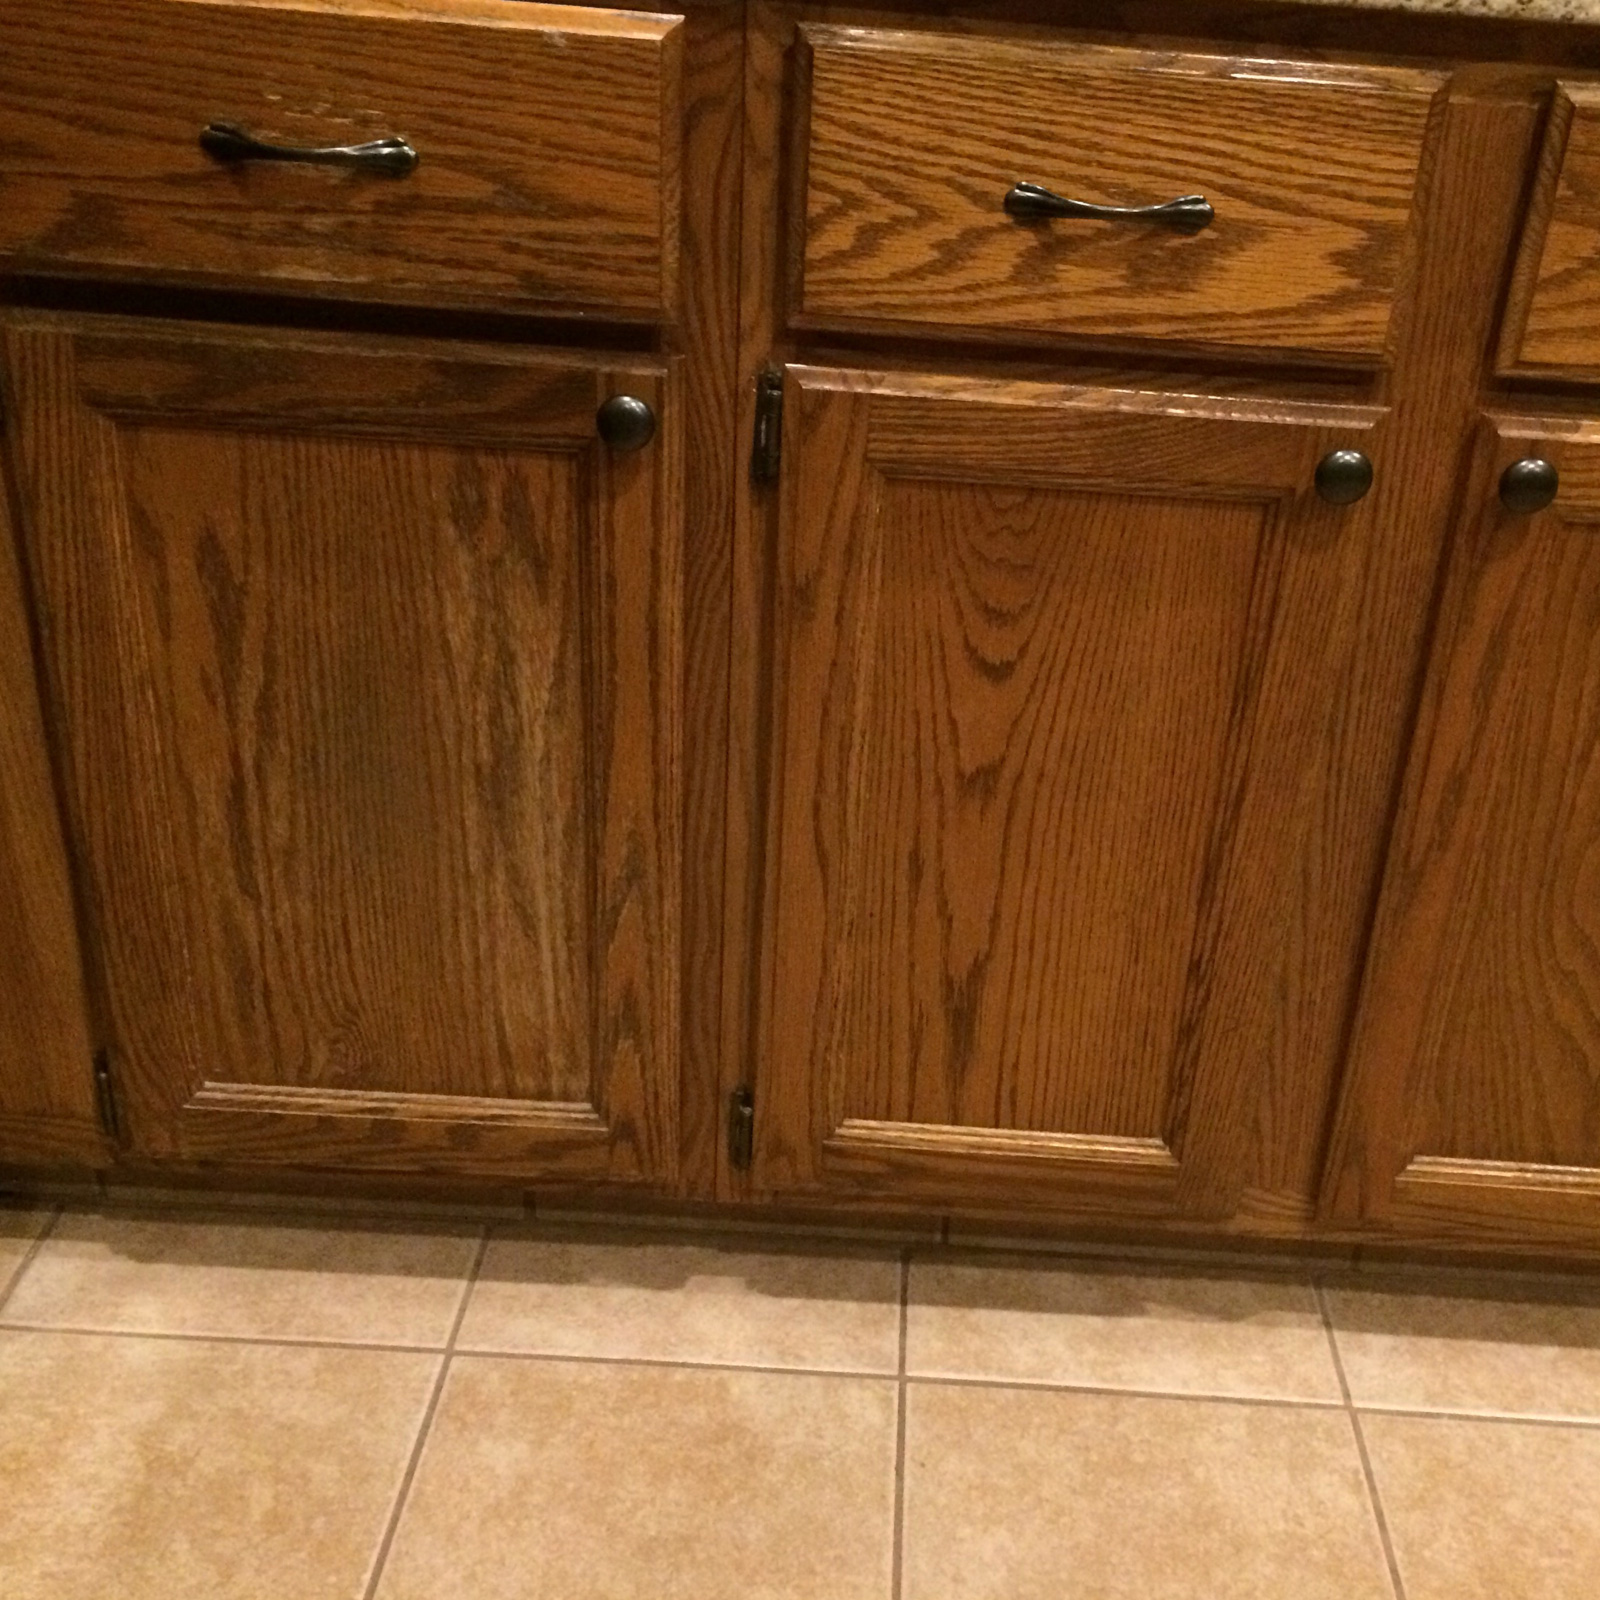 Entry 34 - Out of style & dated cabinetry makes for one tired kitchen!